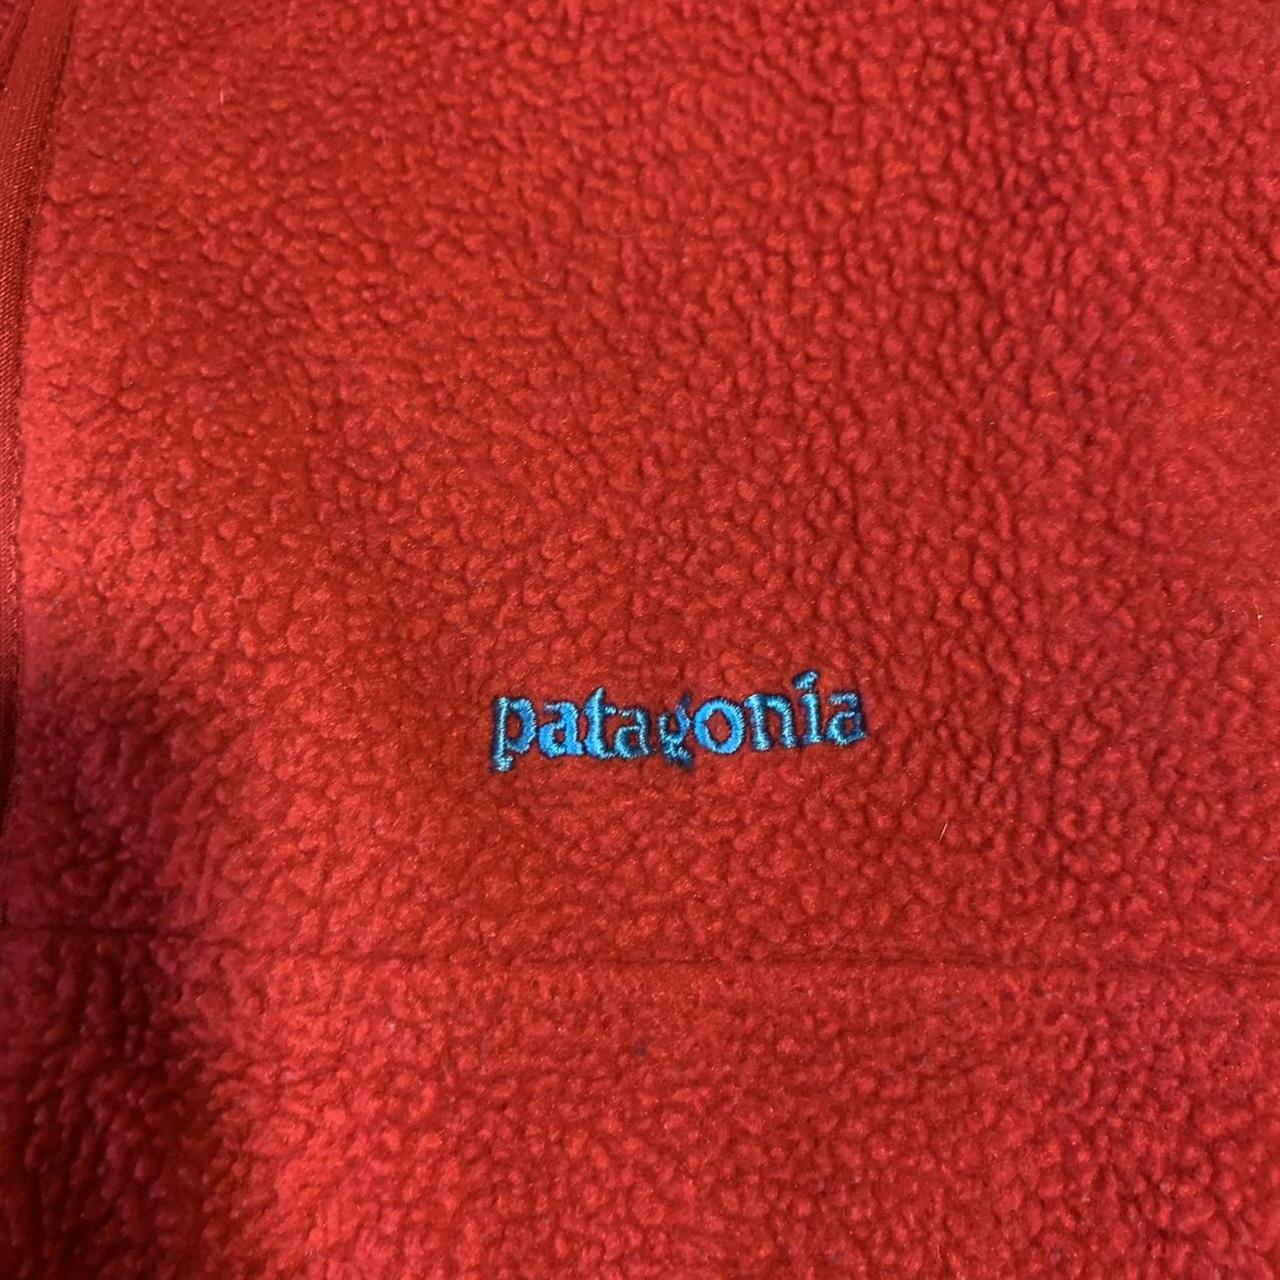 Patagonia Men's Red and Blue Jacket (4)